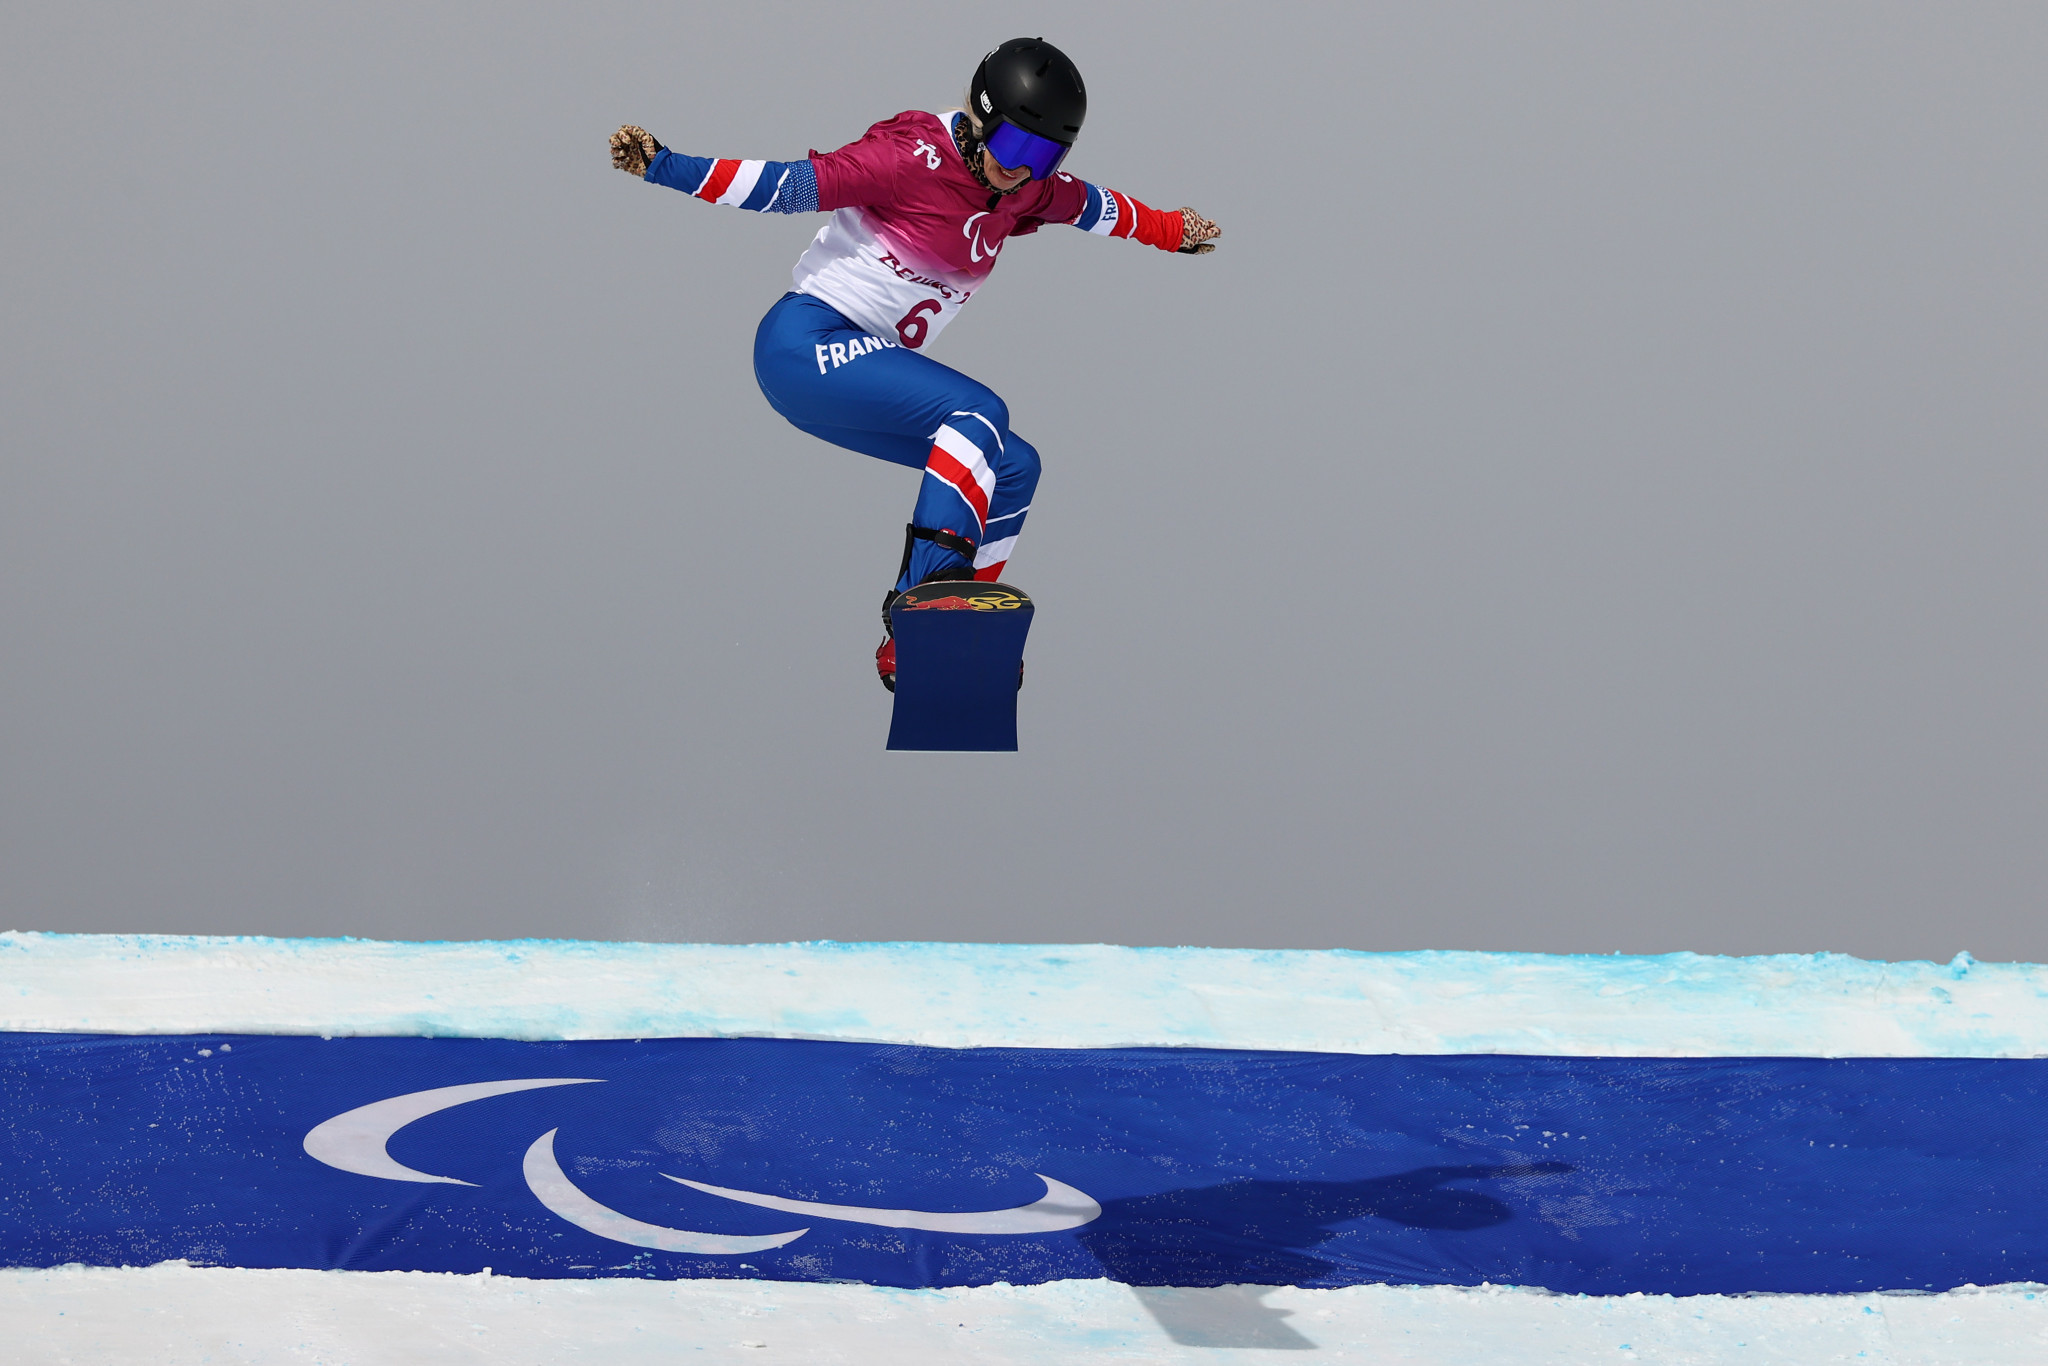 Four sports including Para snowboard had their governance transferred from the IPC in July ©Getty Images